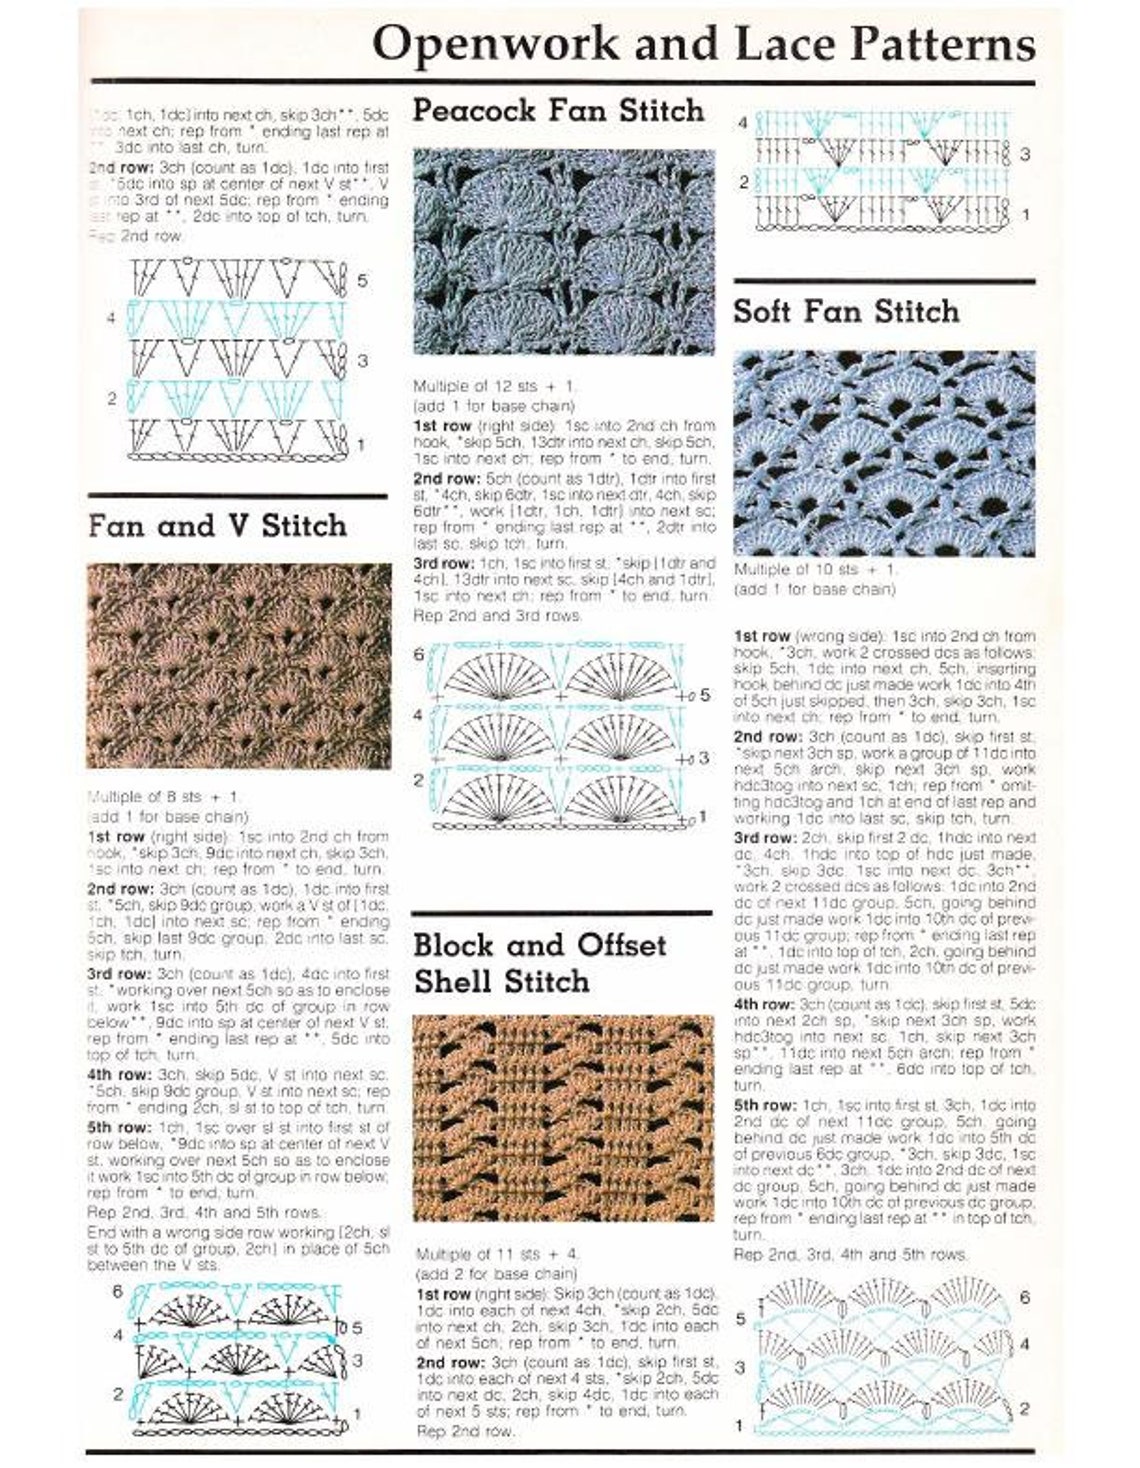 The Harmony Guide to Crocheting 1993 Crochet stitches | Etsy